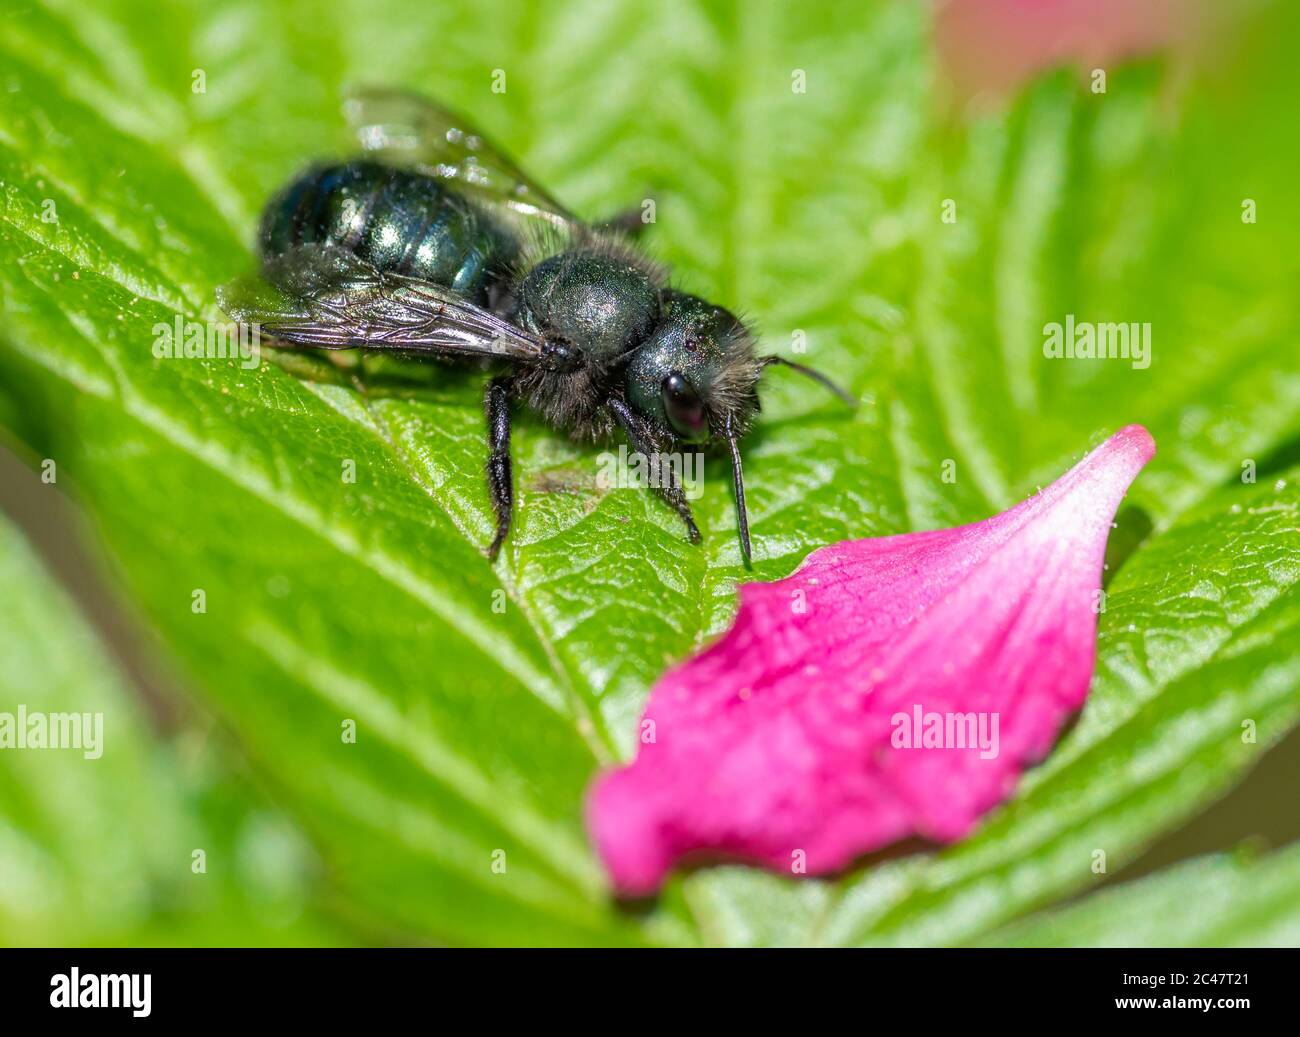 Female Mason Bee (Osmia lignaria) resting on a greeen leaf with a flower petal in Spring Stock Photo